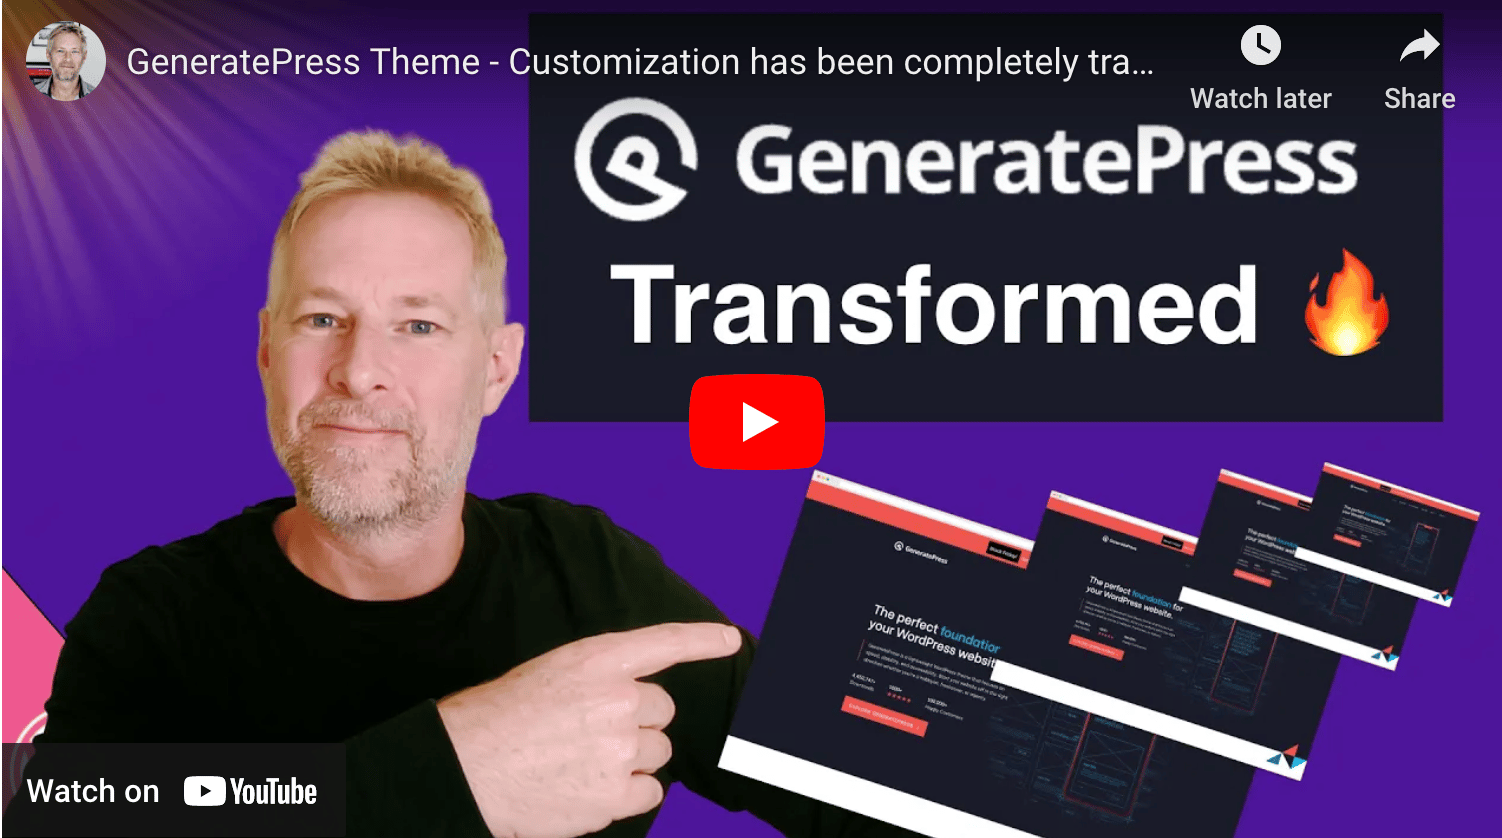 GeneratePress Theme – Customization has been completely transformed!